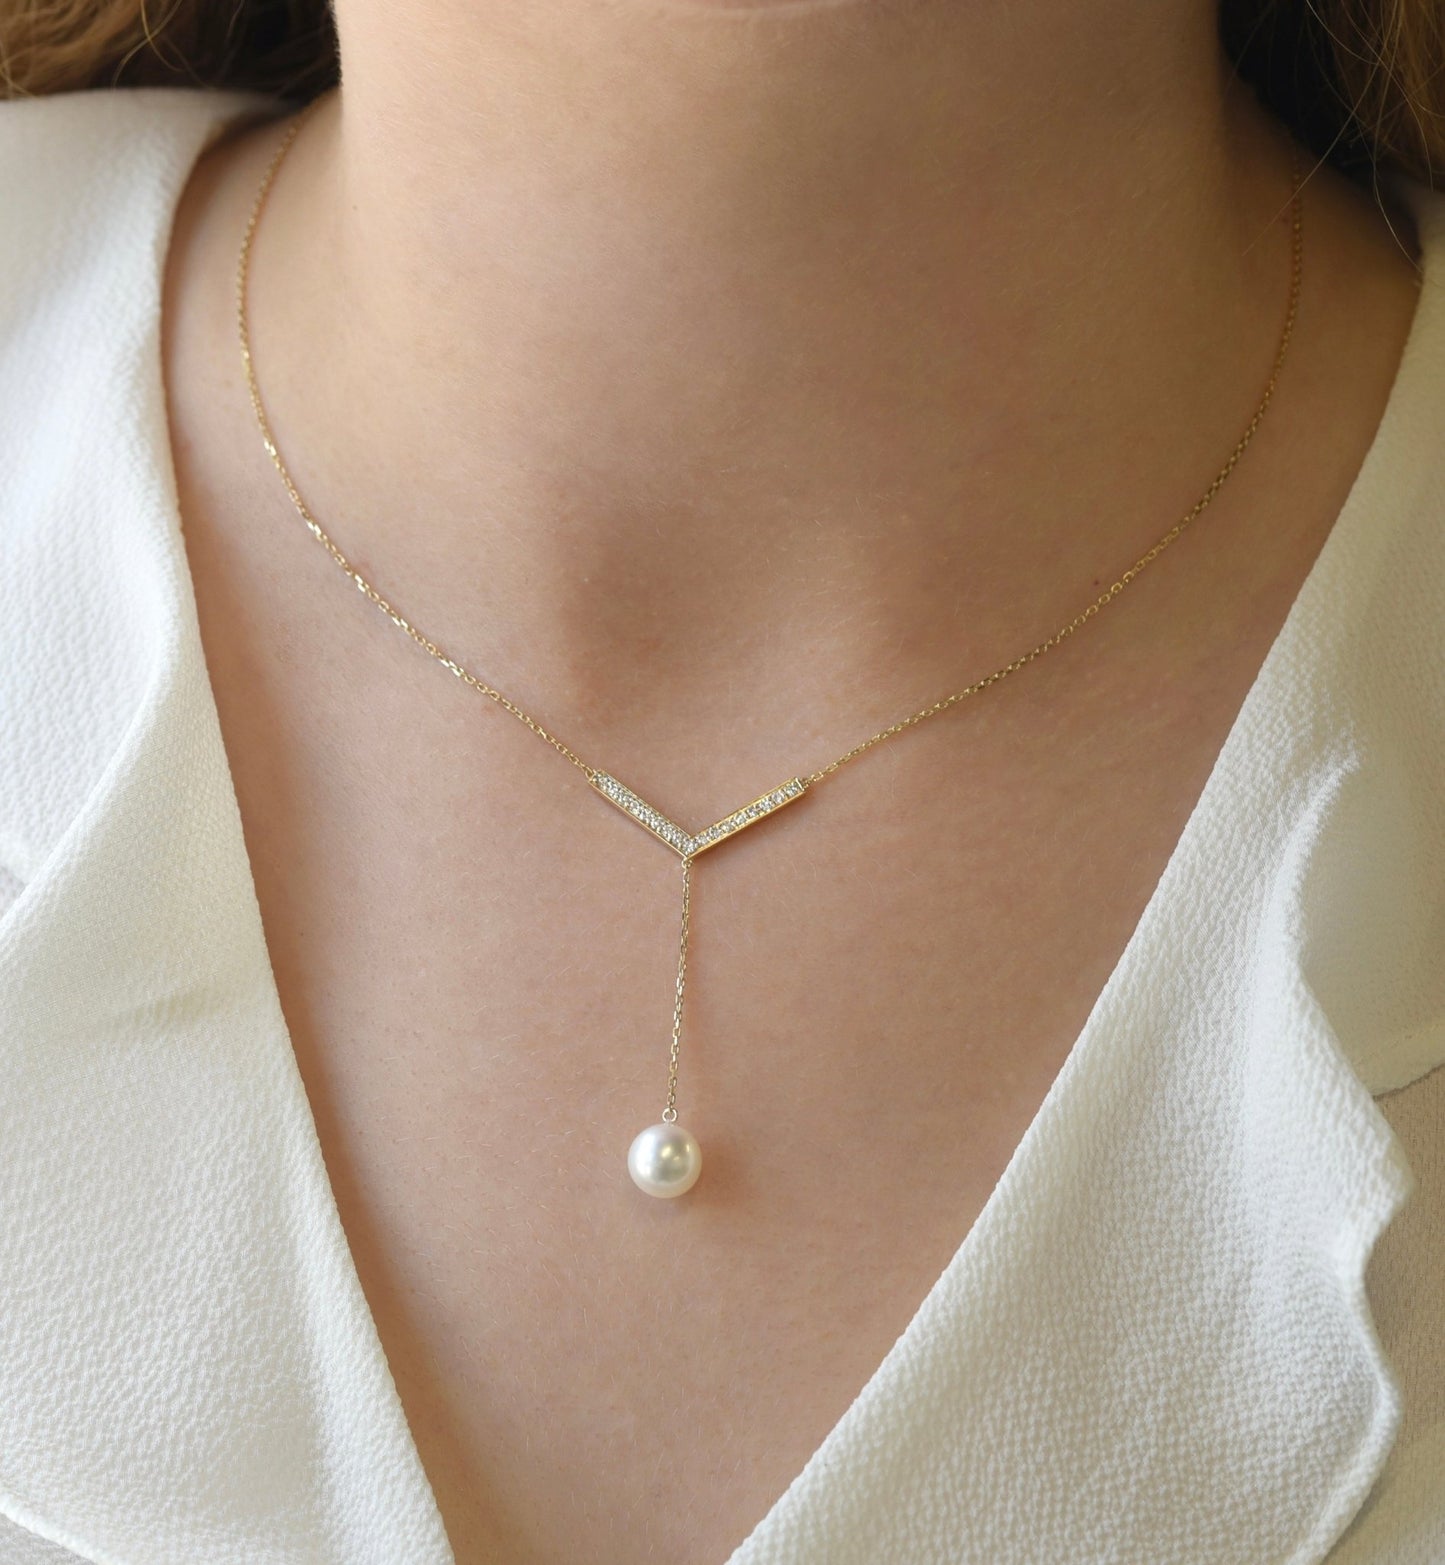 Arlene Necklace in Diamond and Pearl - 18k Gold - Lynor